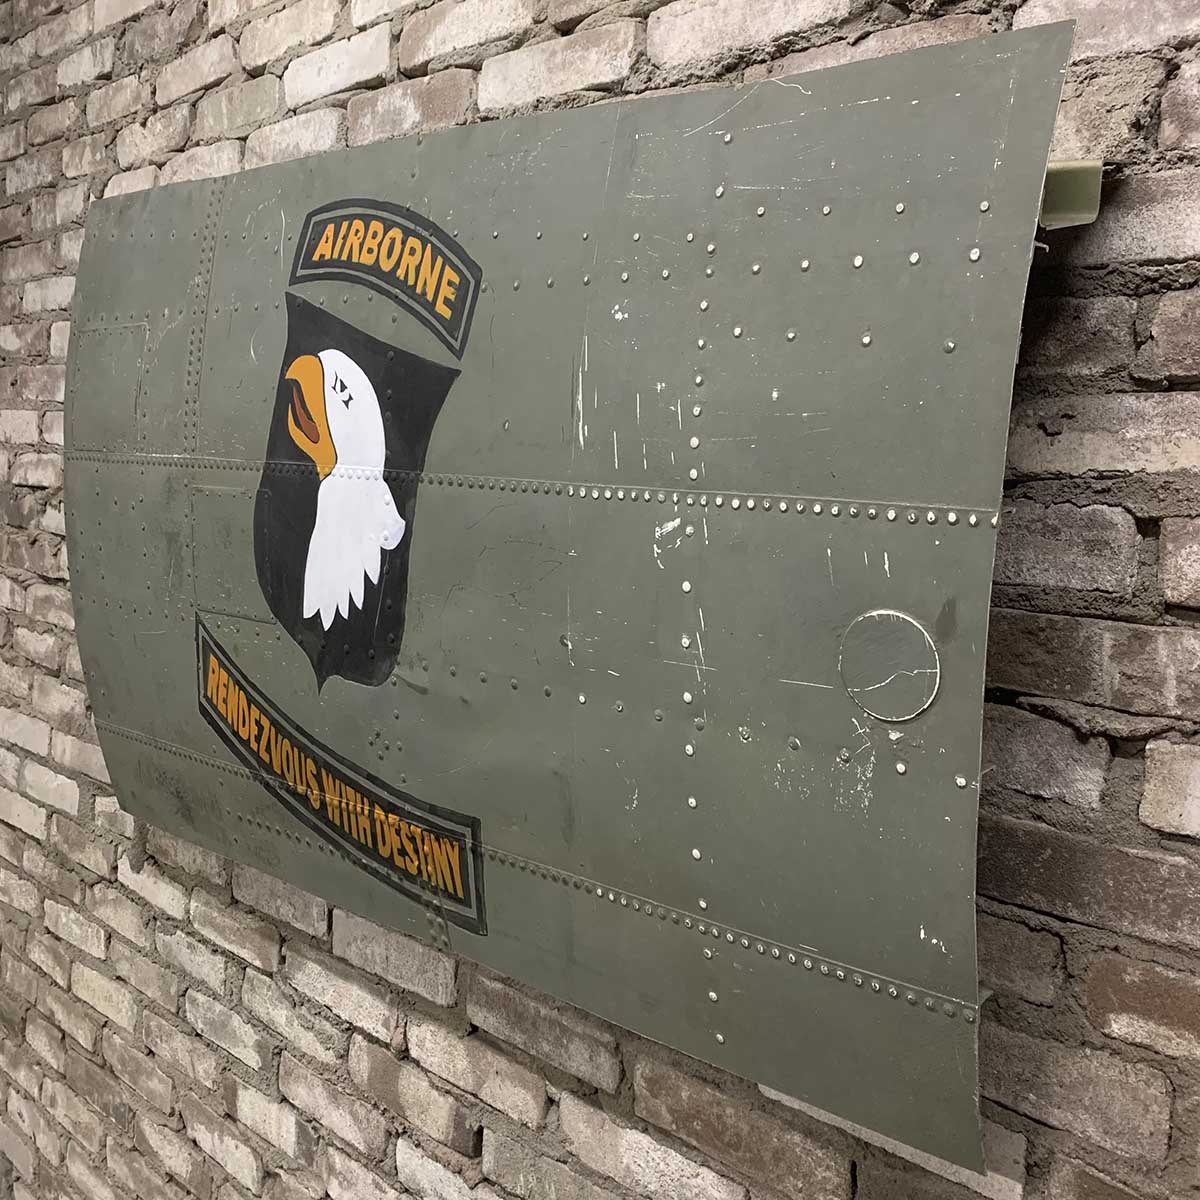 Original C-47 Dakota skin panel painted with Rendezvous with Destiny nose art hanging on a brick wall.